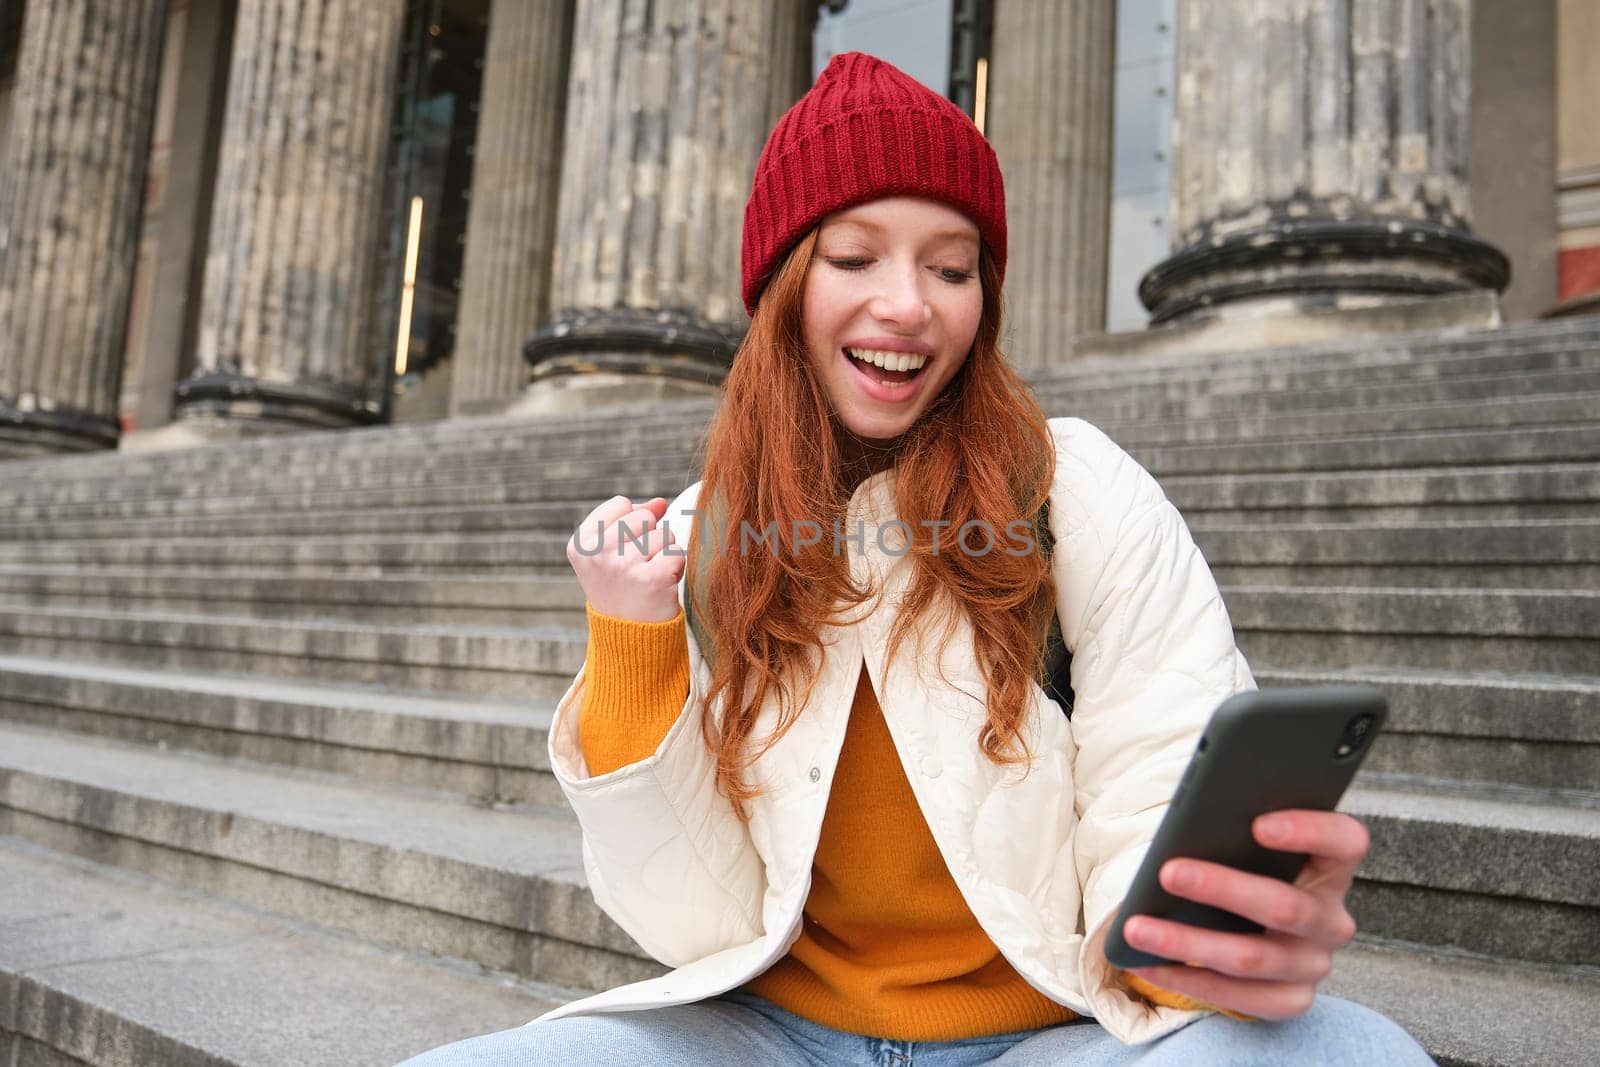 Achievement celebration. Happy redhead girl sits on stairs outdoors and looks at phone, triumphs, wins something and looks satisfied at mobile screen.